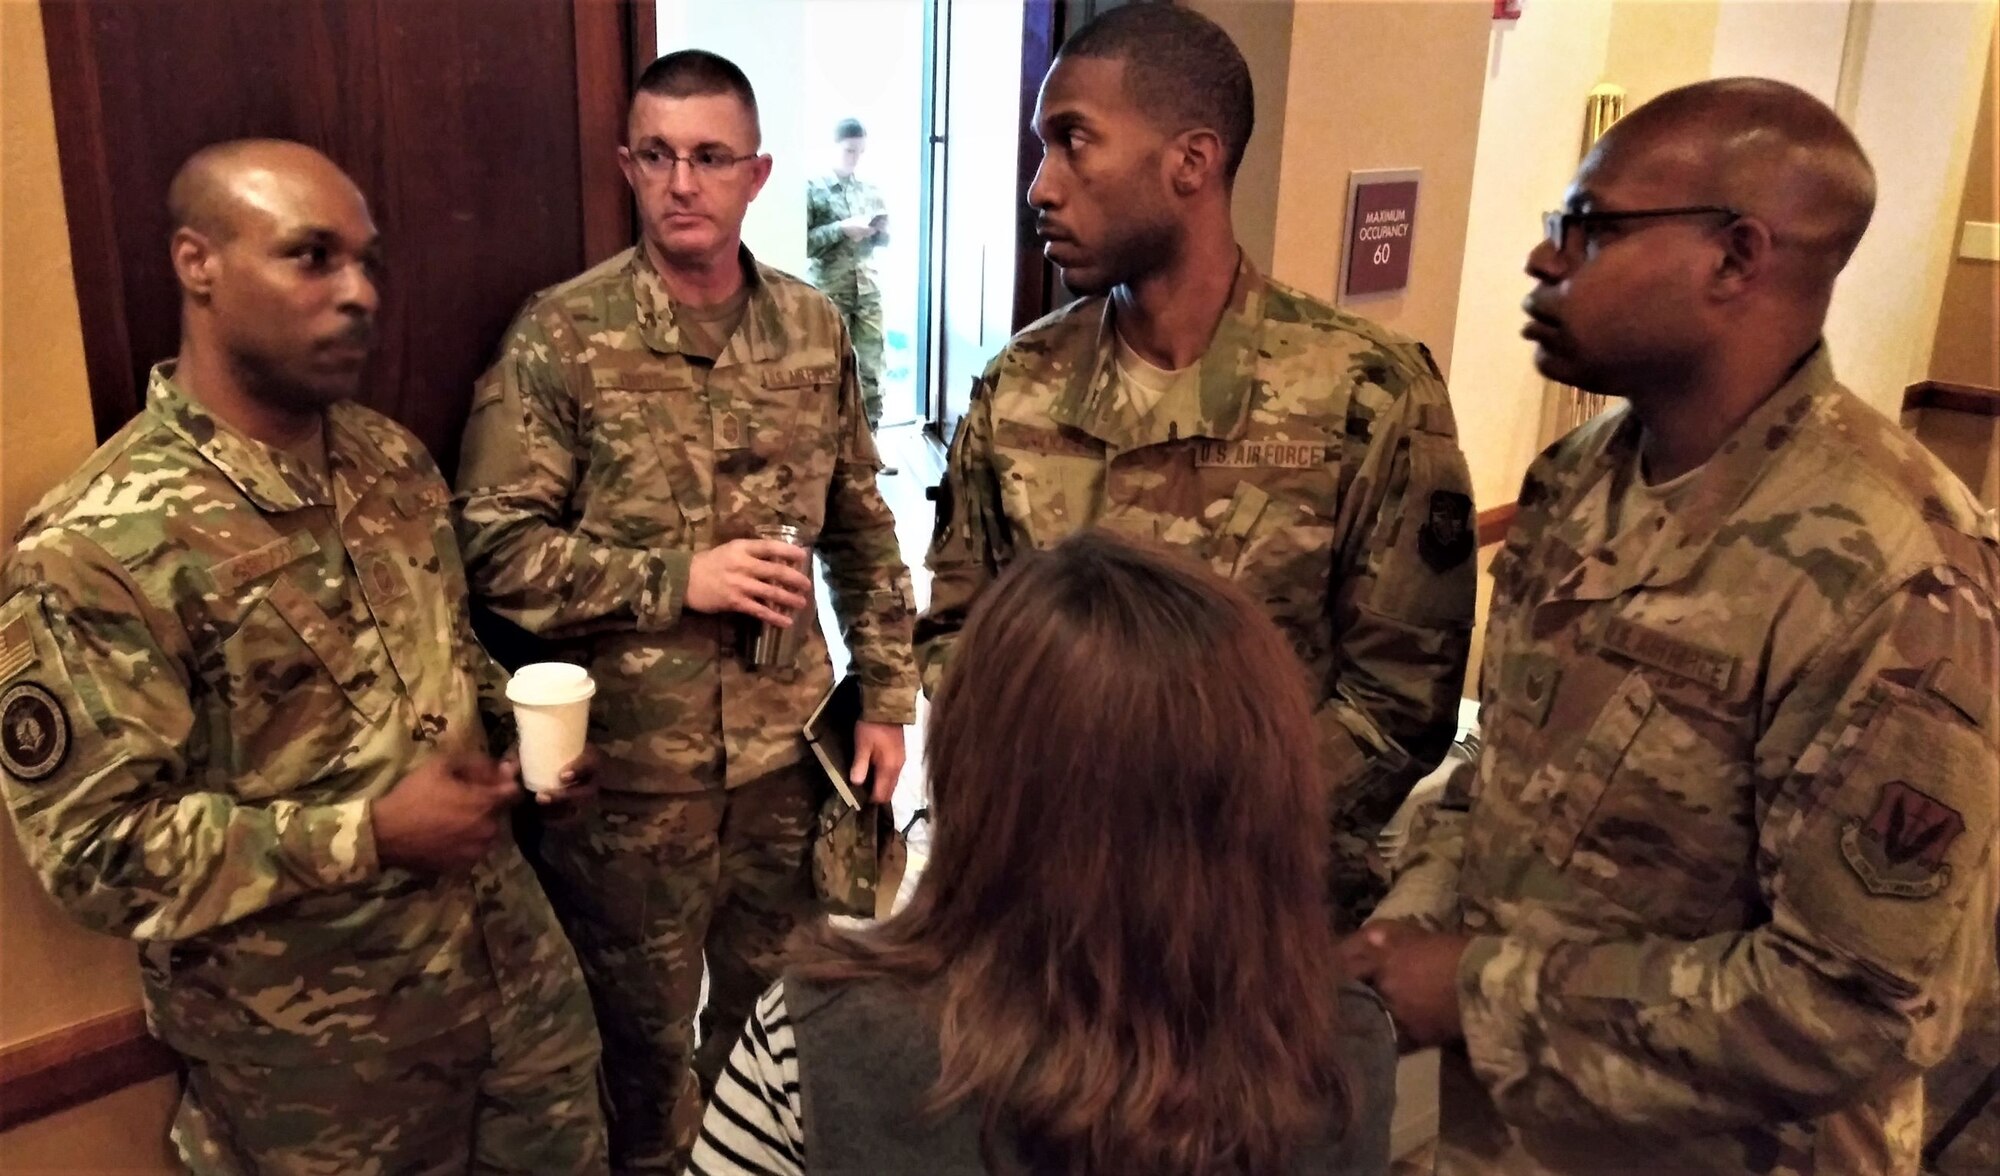 (From left) Chief Master Sgt. Kendall Briscoe, Chief Master Sgt. Chris Coats and Linda Alcala discuss financial operations issues with Staff Sgt. Terrence Troope, Group Resource Advisor, 916 Air Reserve Wing at Seymour-Johnson AFB, North Carolina; and Tech. Sgt. Lawrence Robinson, NCOIC of the 633rd Comptroller Squadron Financial Operations Flight at Joint Base Langley-Eustis, Virginia. Briscoe is the Air Force financial management career field manager, Coats is the Air Education and Training Command financial management chief enlisted manager, and Alcala is AFIMSC's financial operations chief.